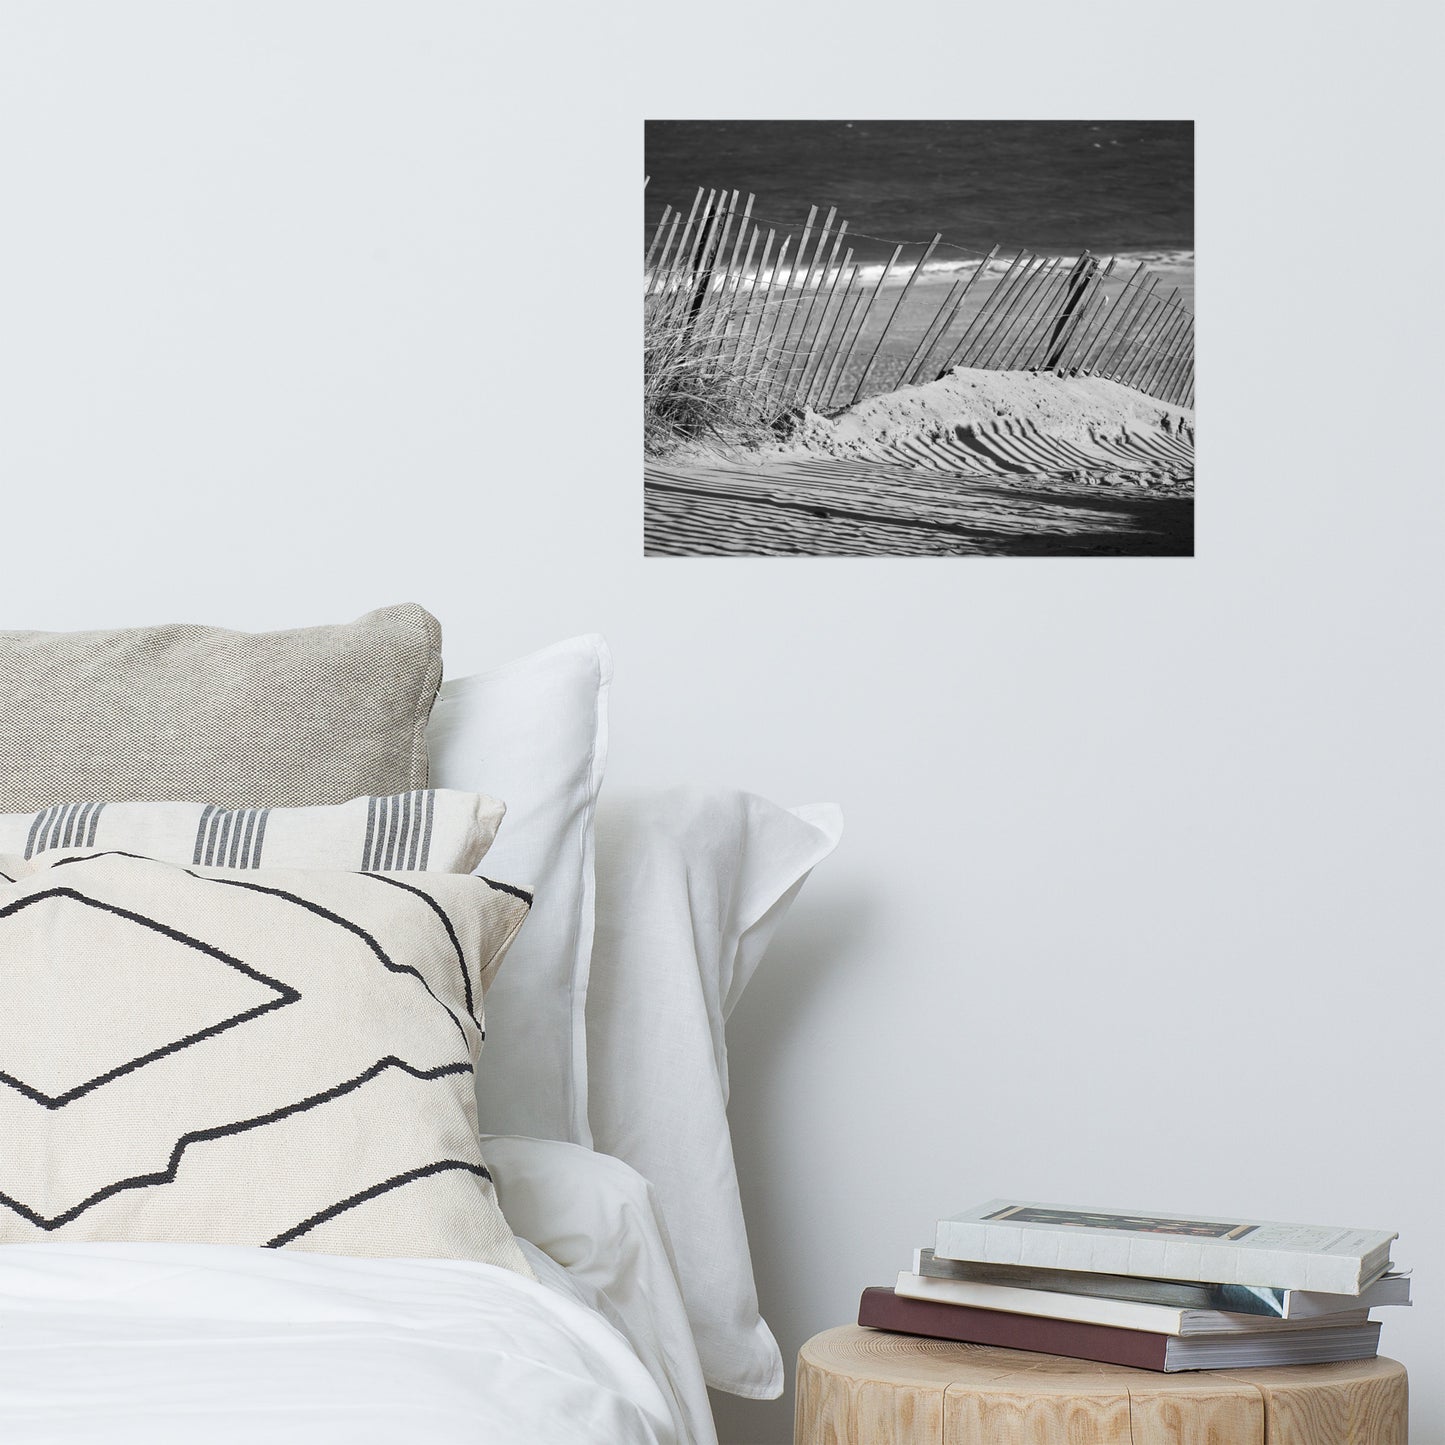 Sandy Beach Fence Black and White Landscape Photo Loose Wall Art Prints